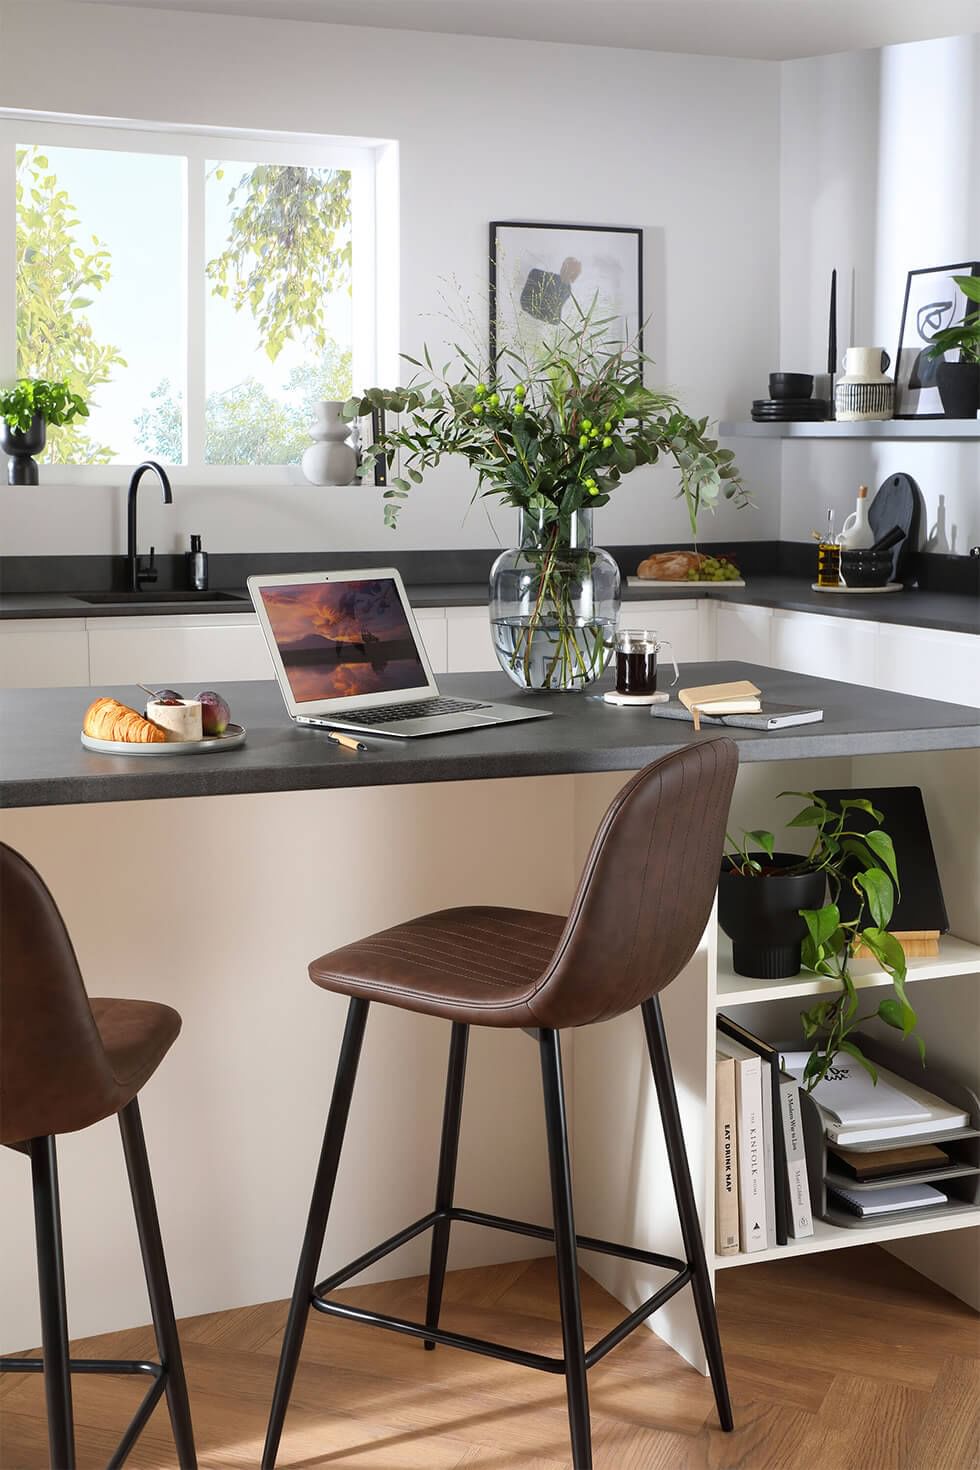 Kitchen-diner that doubles as work from home area